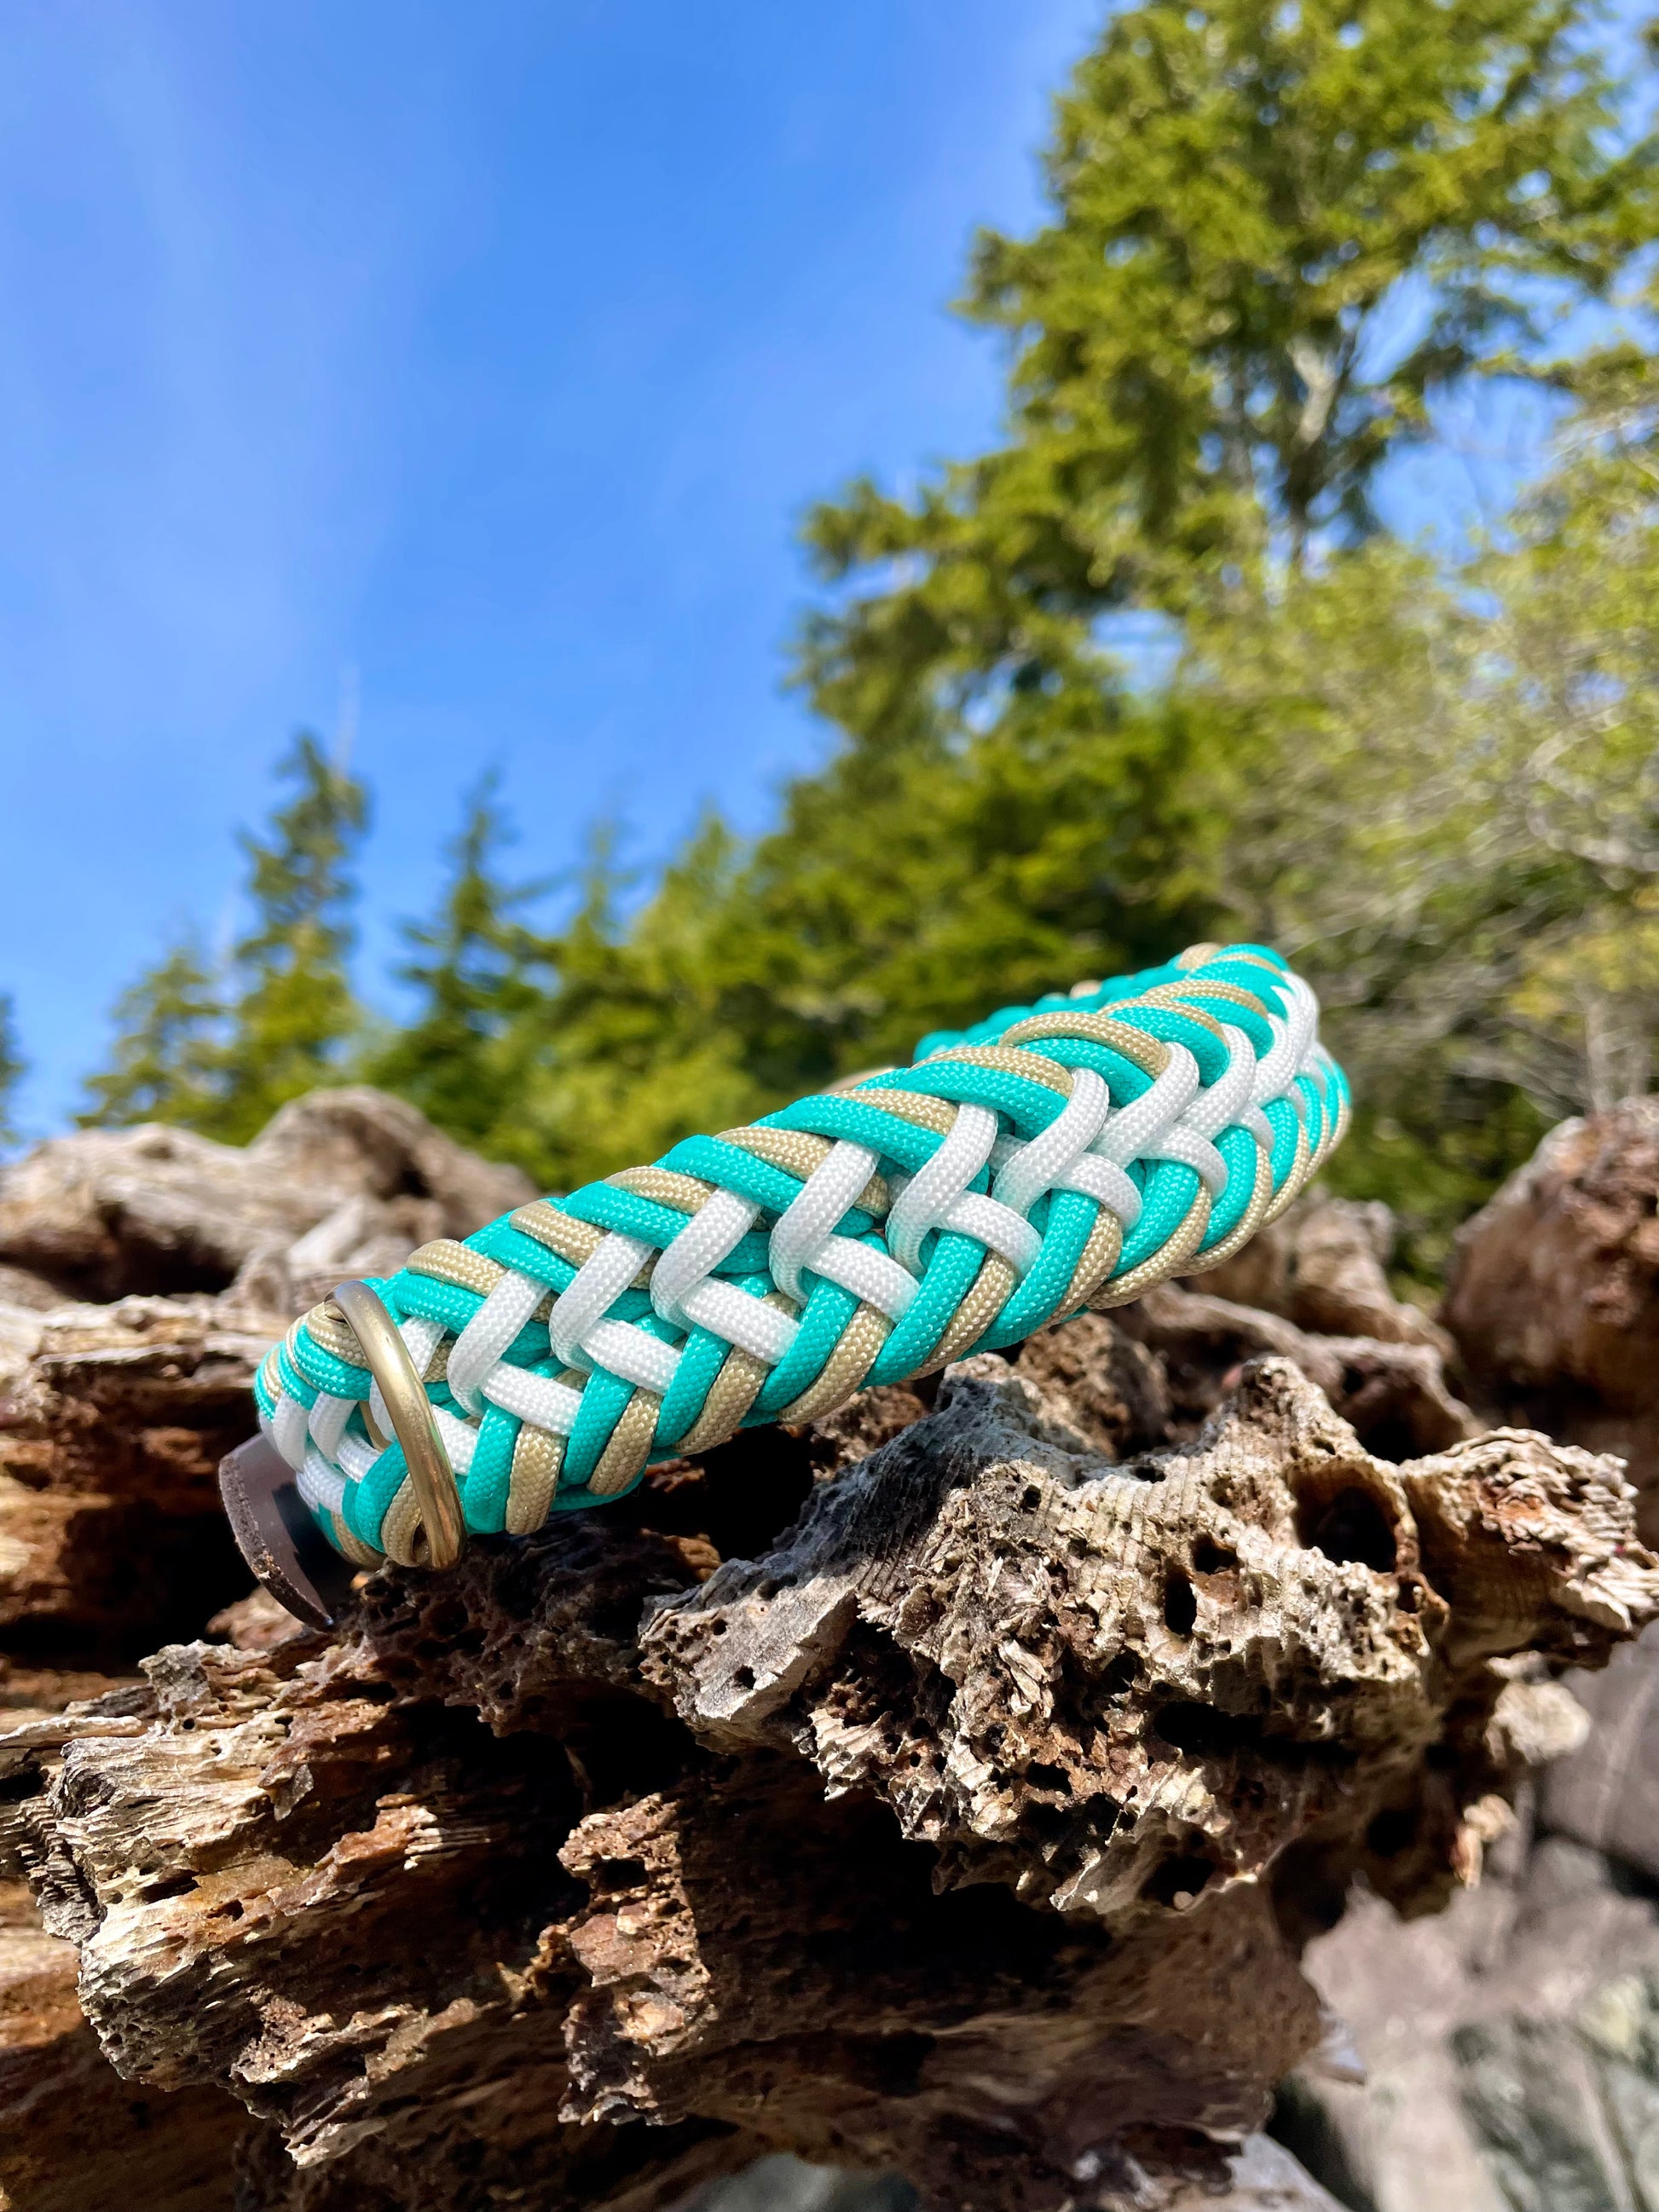 Beautiful Teal Paracord Dog Collar With Gold Hardware and leather or biothane belt